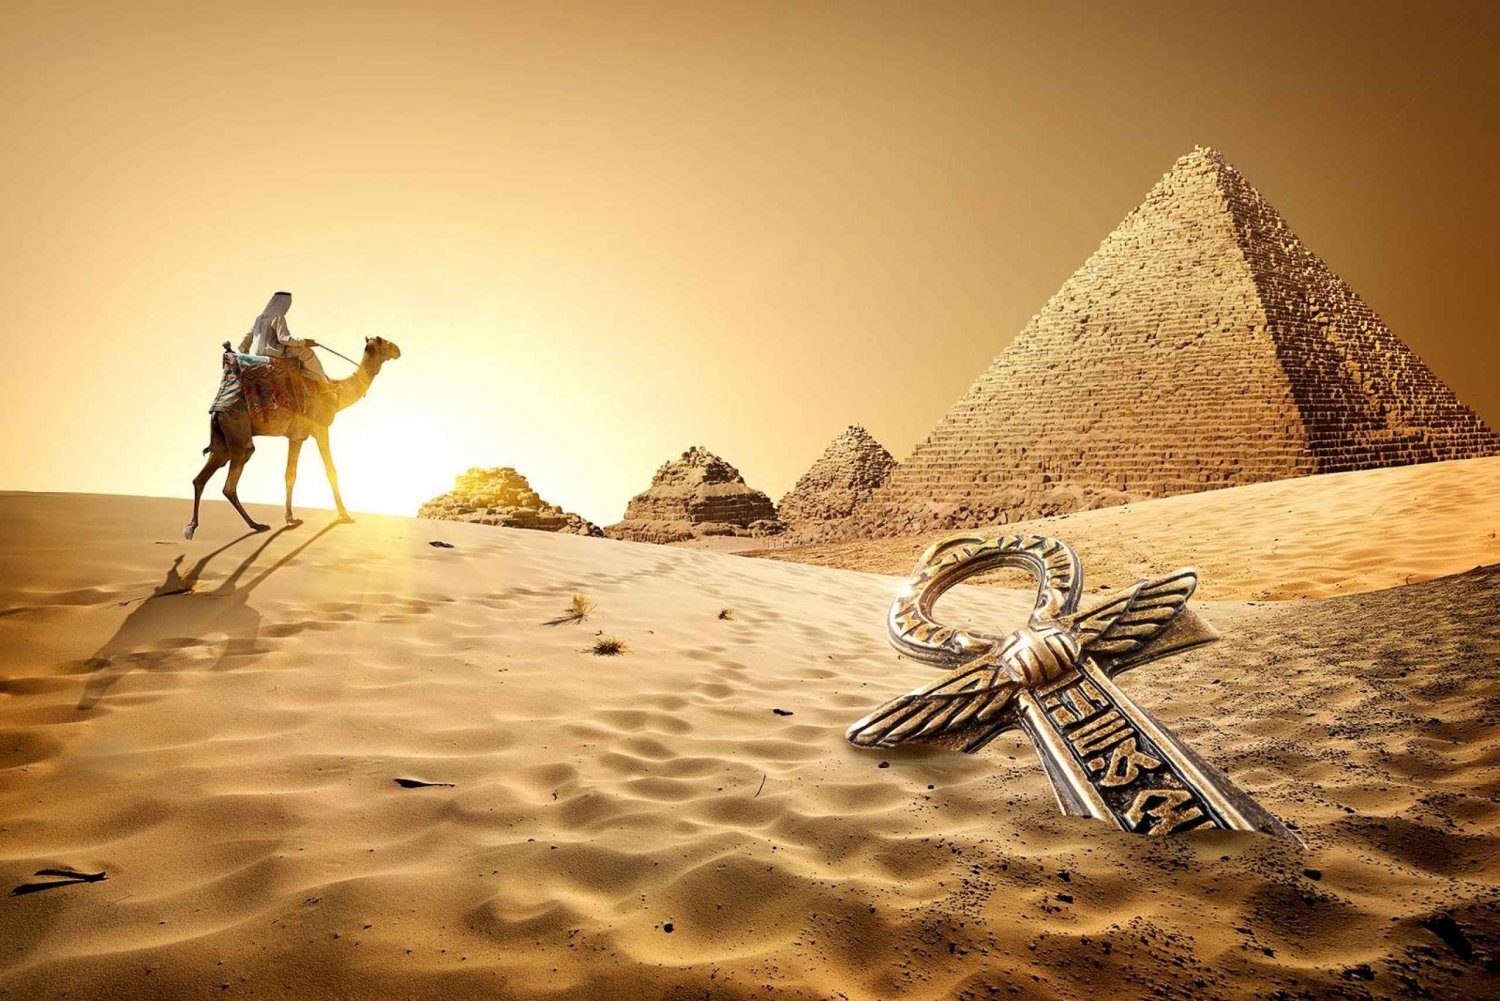 Cairo: Egypt Tour Package: 15 Days All-Inclusive